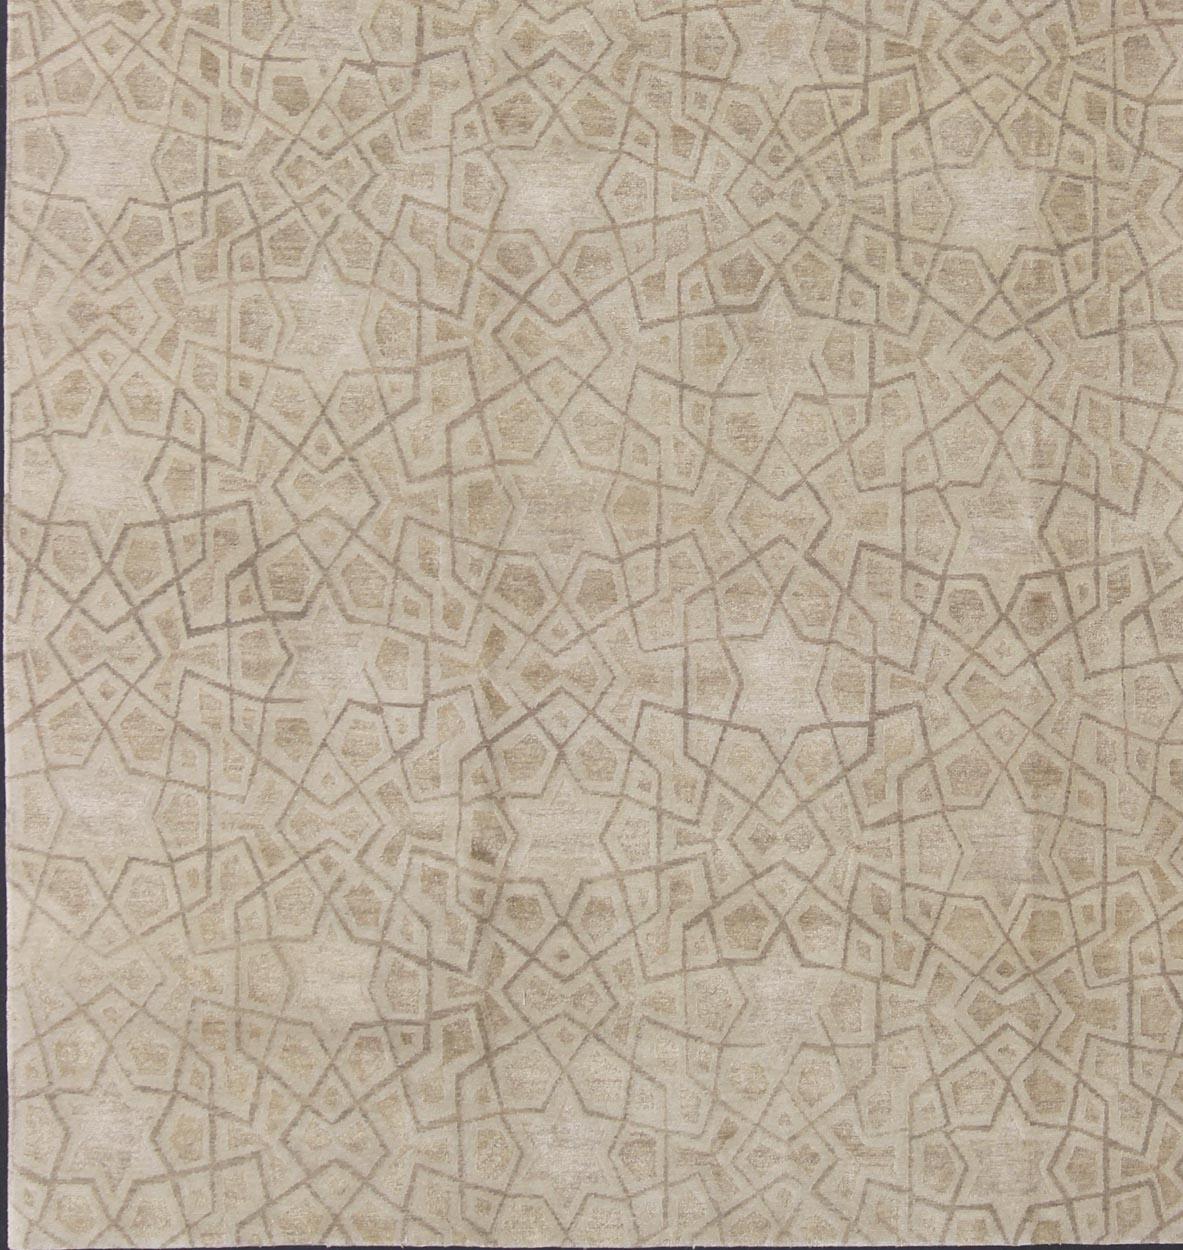 Wool and silk modern design Tibetan rug from Nepal in neutrals and earth tones, Nepalese Modern rug with all-over star, diamonds and geometric pattern, rug 19-0824, country of origin / type: Nepal / Modern

This rug from Nepal is made of silk and